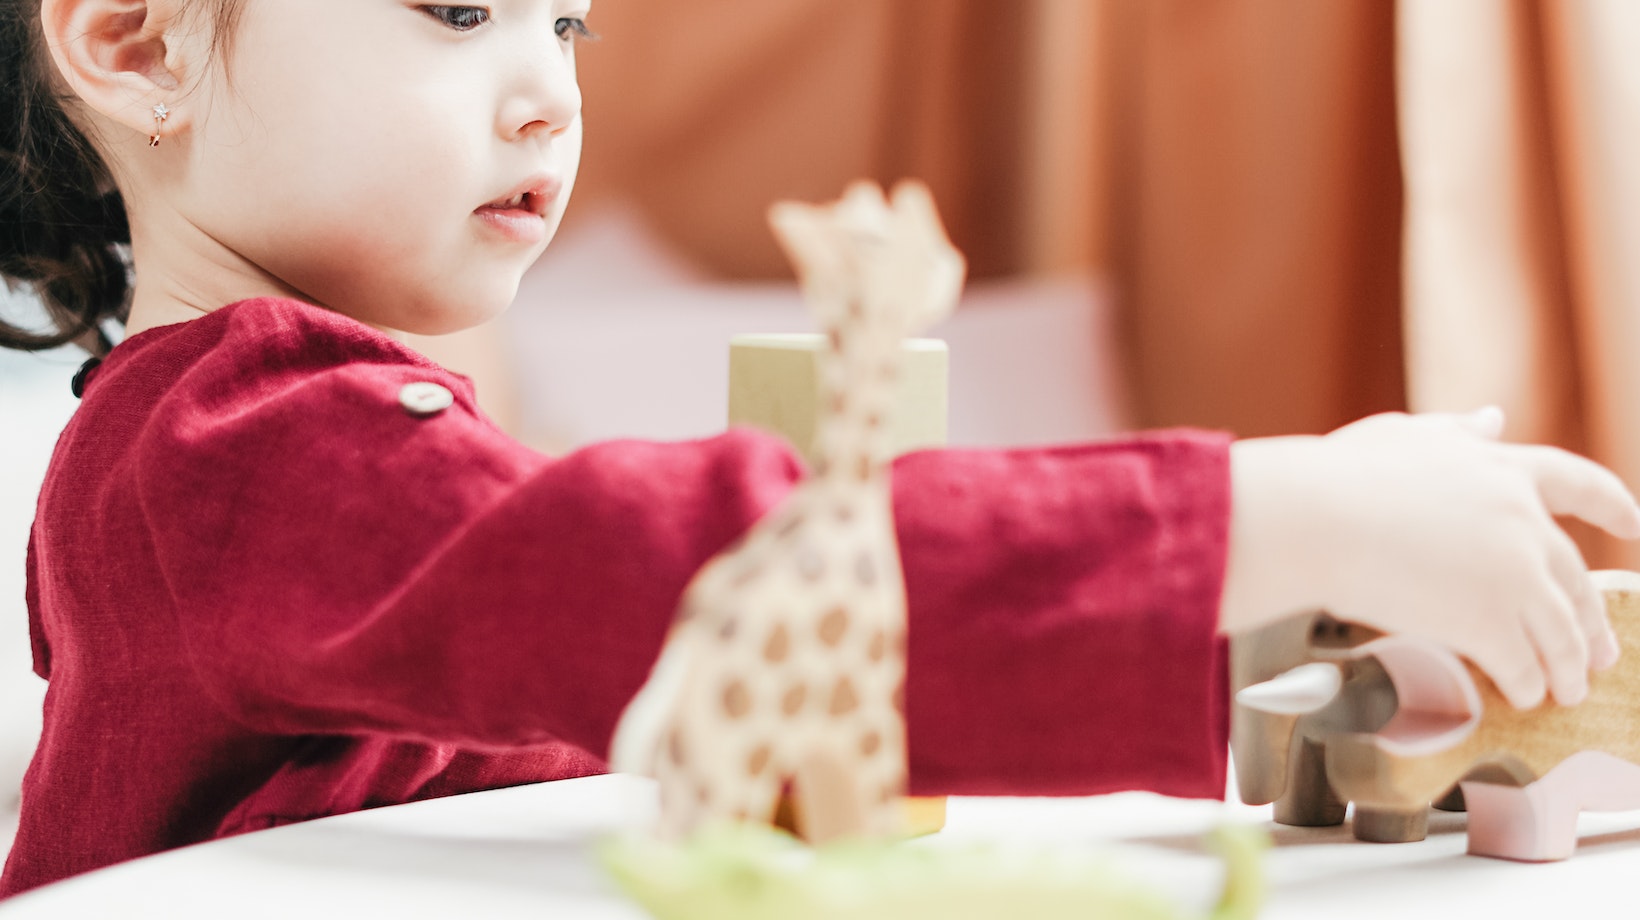 montessori toys for toddlers